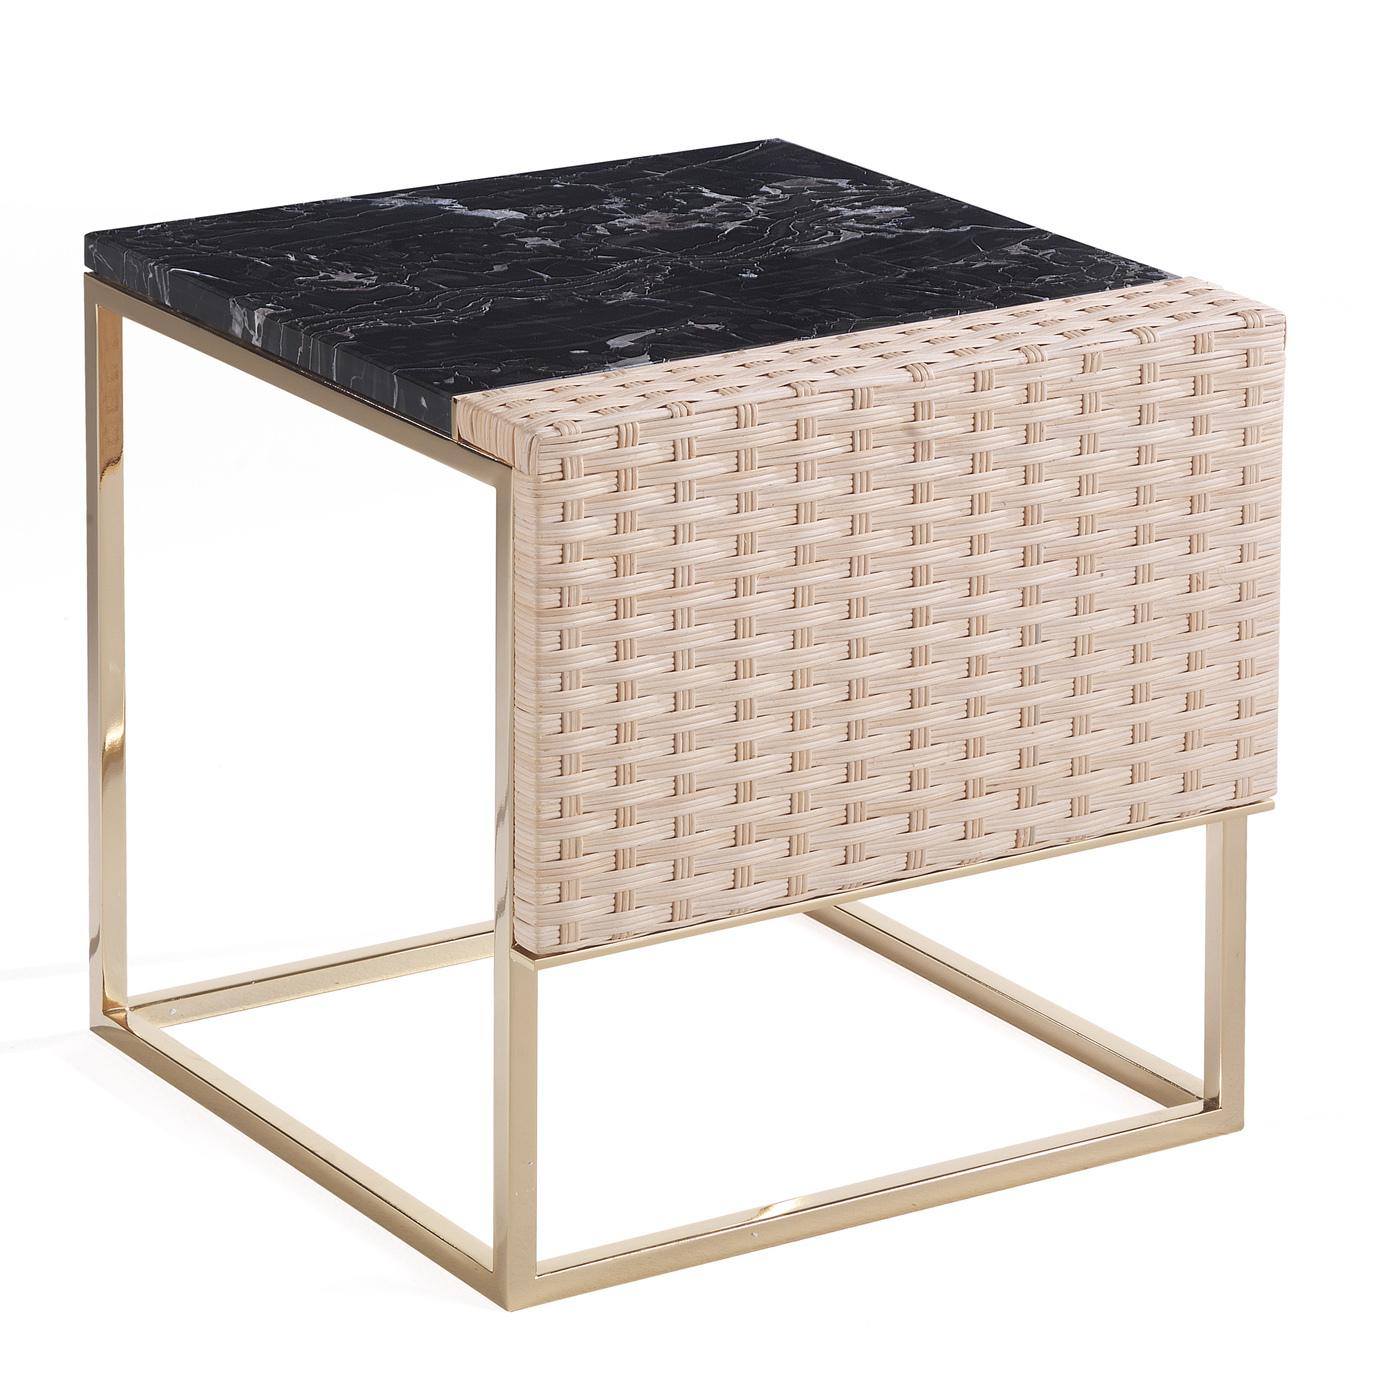 An eclectic and versatile piece of functional decor, this small side table will elevate the look of any home or office decor. It is composed of a cubic brushed brass structure on which lays a splendid top in black Portoro marble and a masterfully